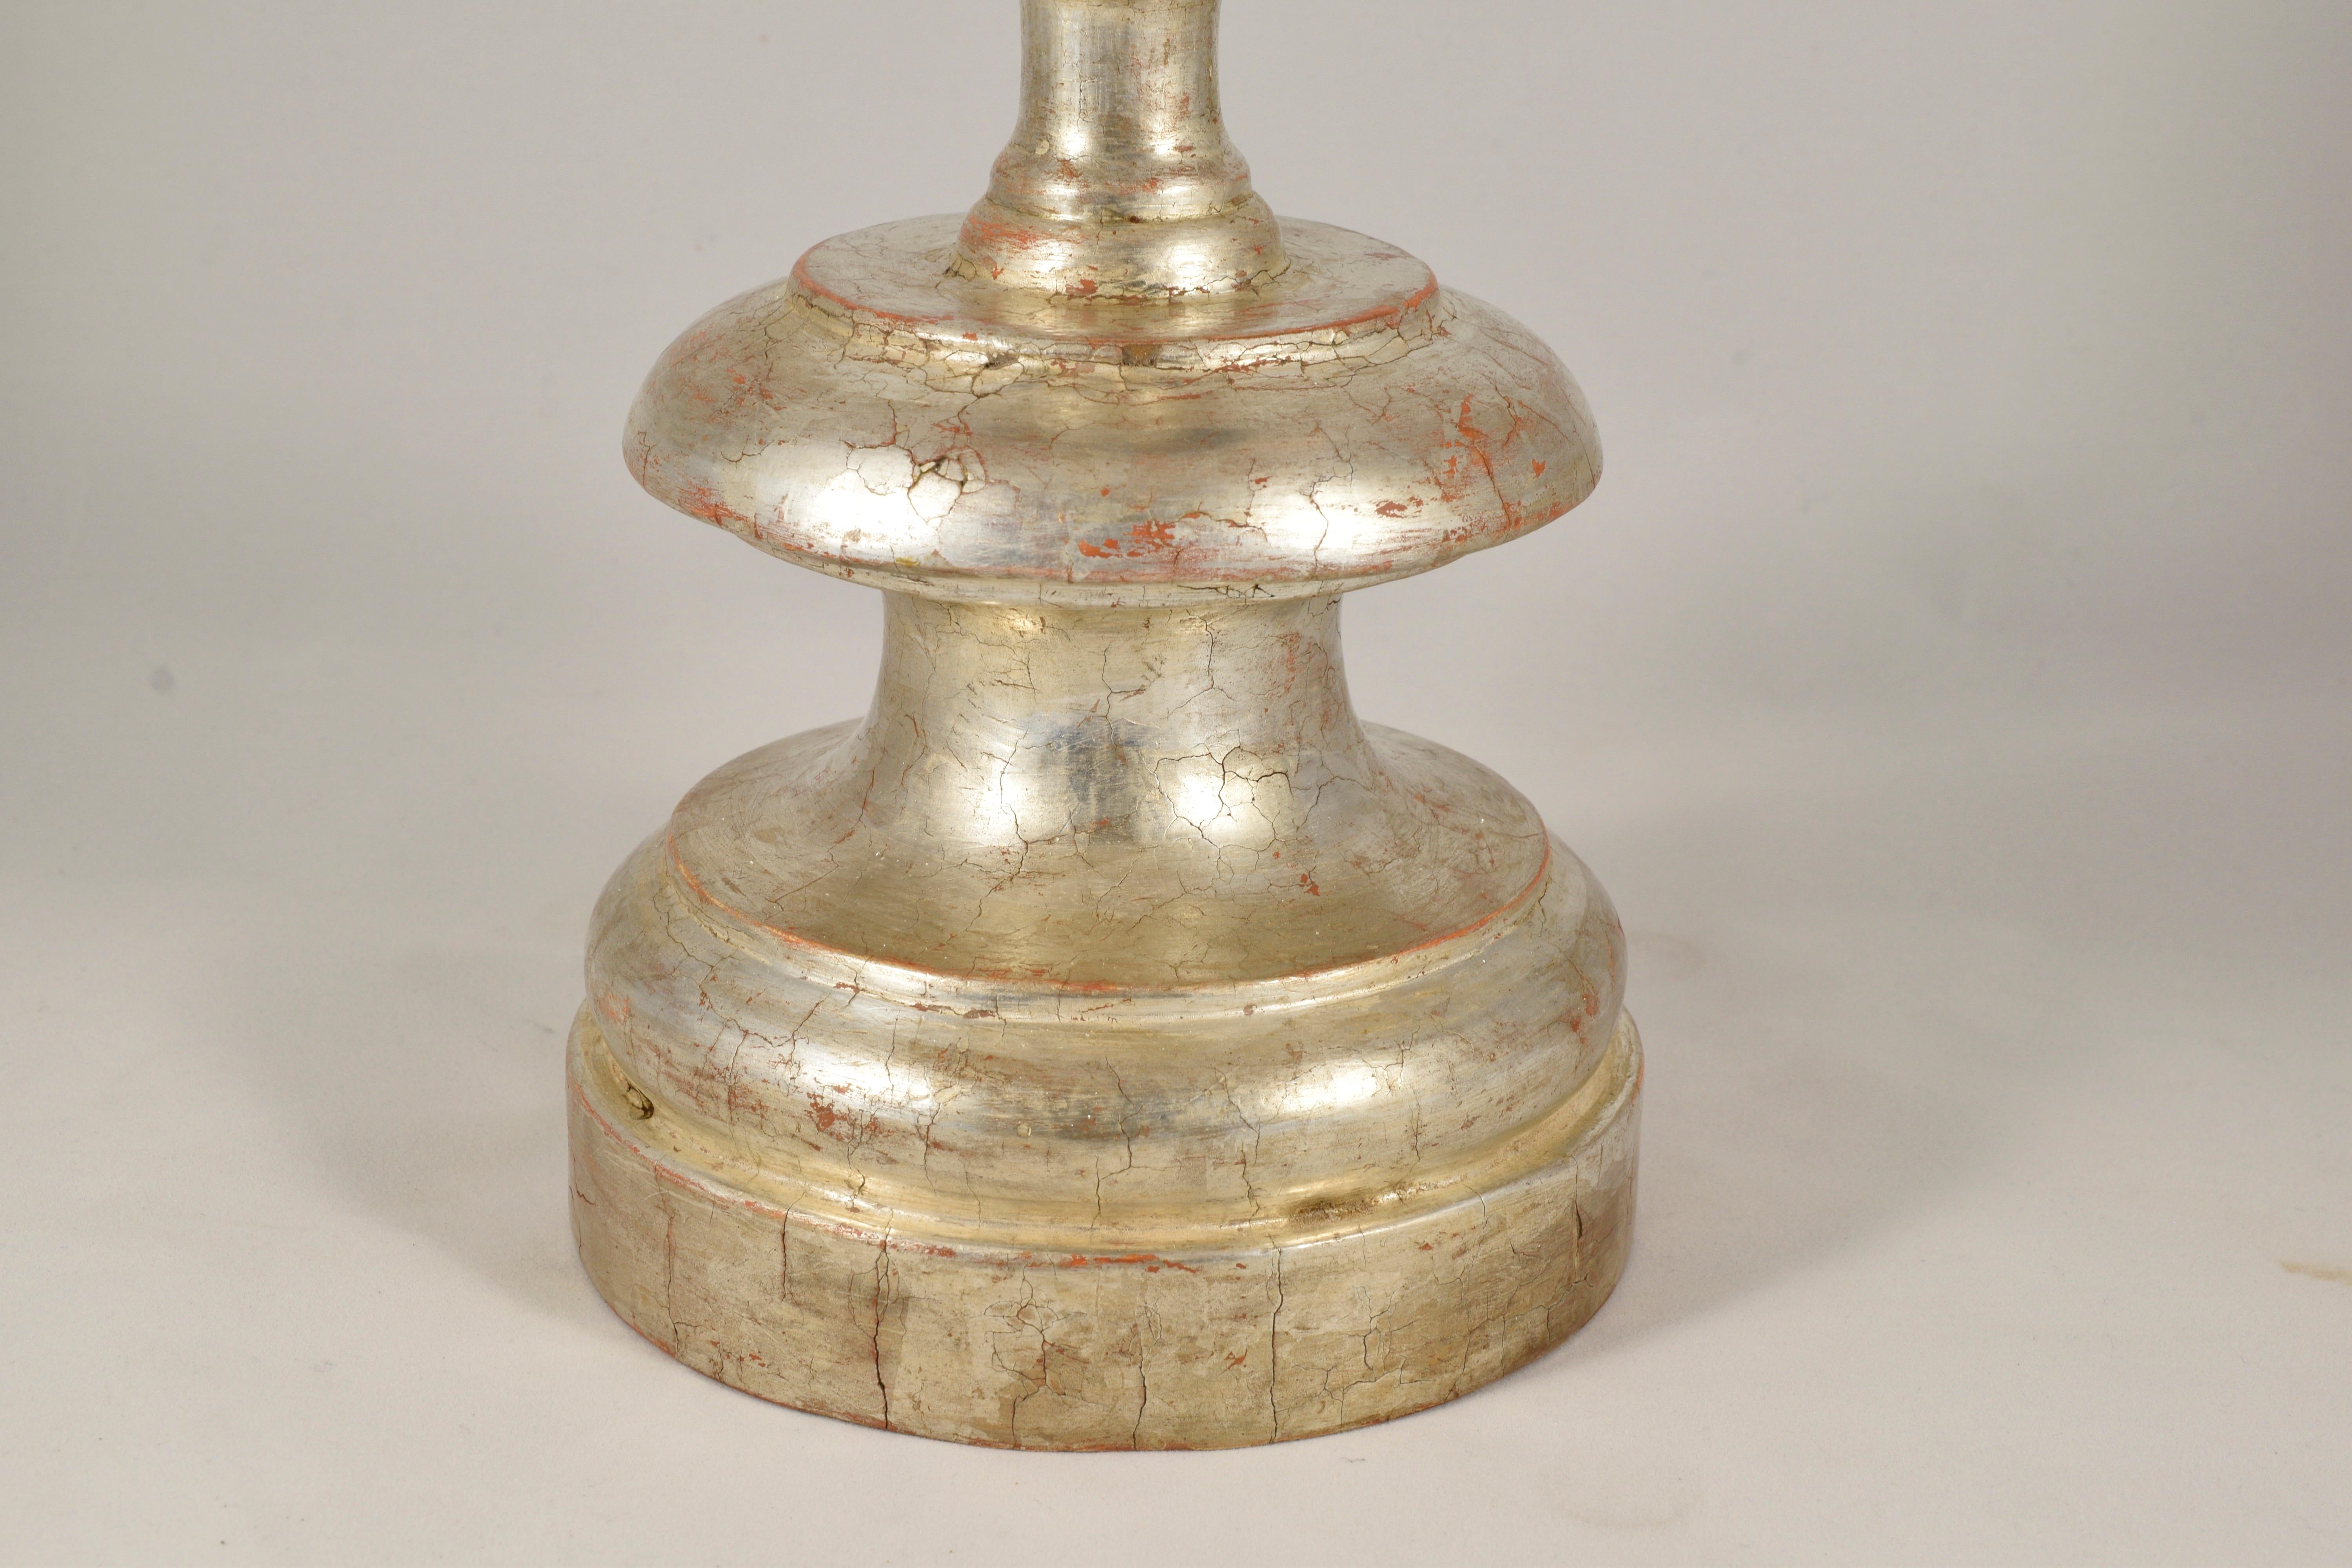 Renaissance Florentine Candlestick in Lathed and Silvered Wood, Late 17th Century For Sale